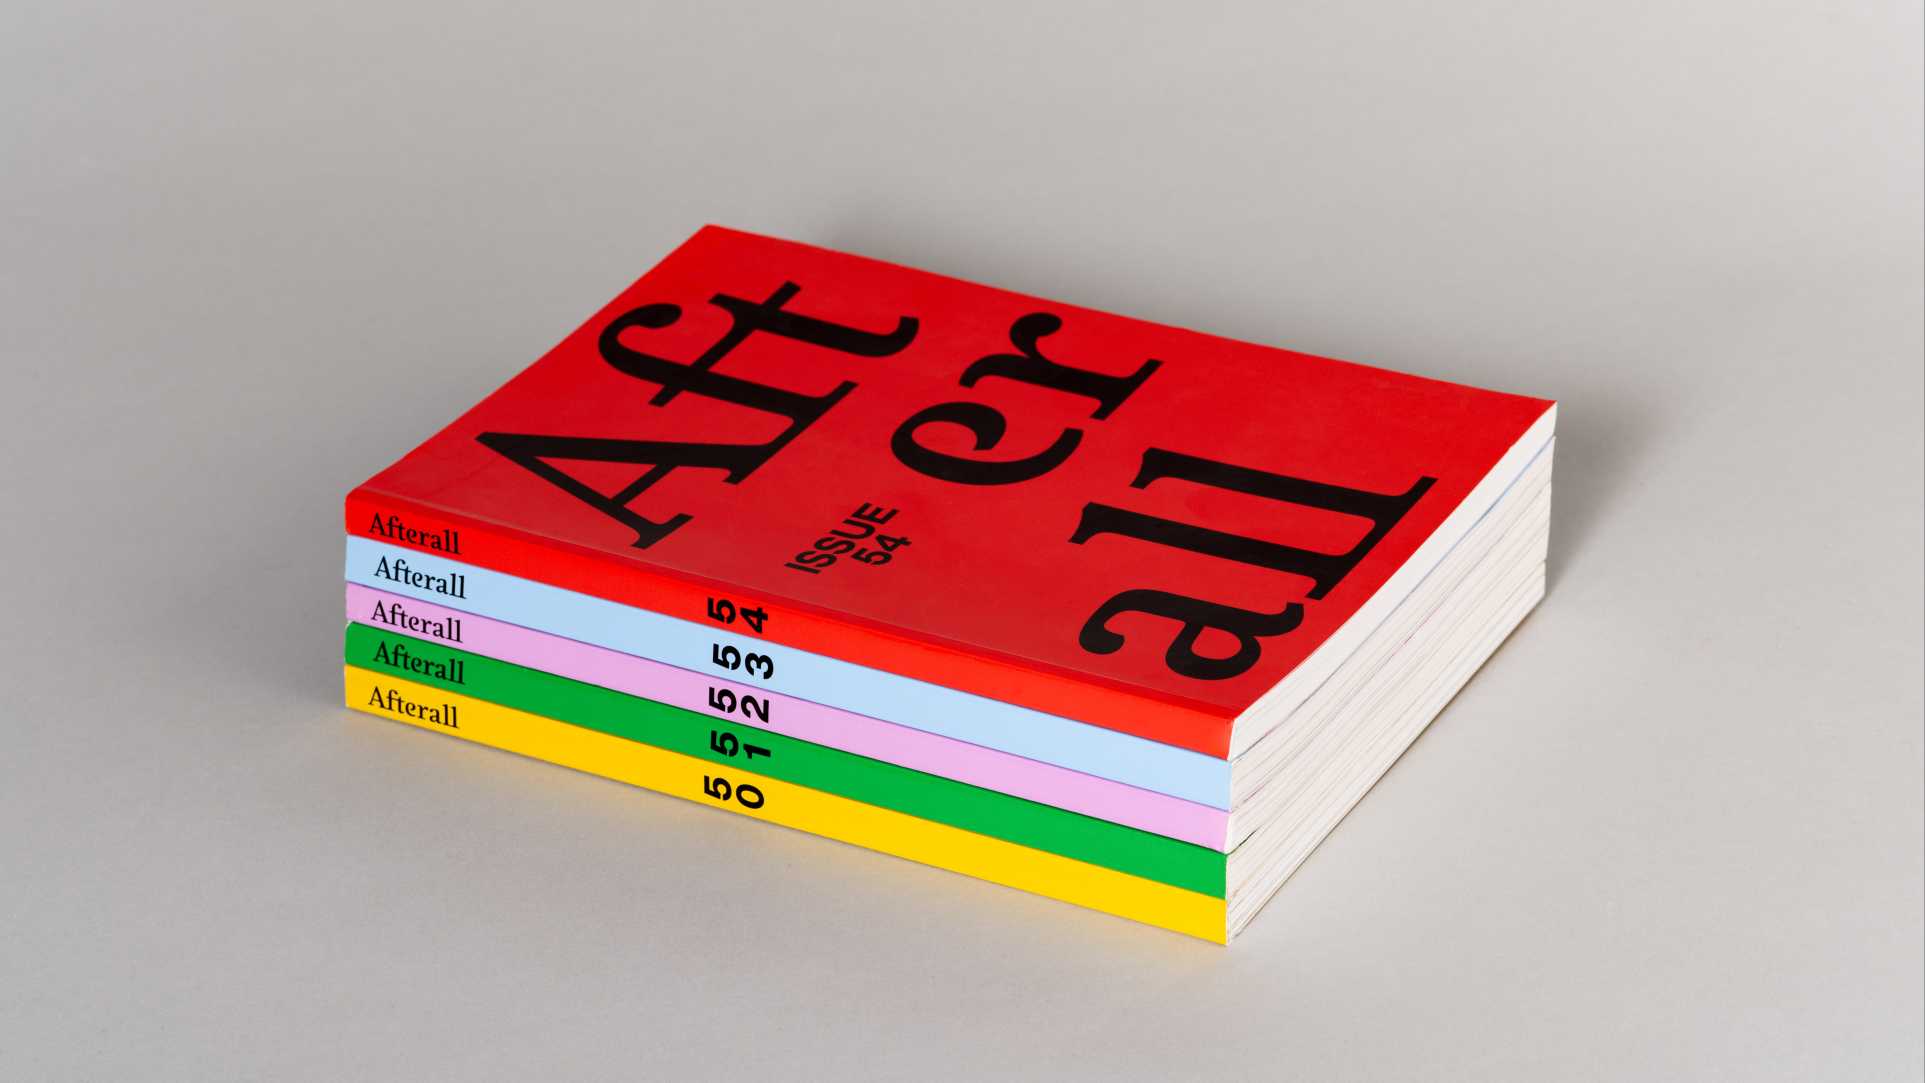 Stack of alternating magazine covers, all with the title "Afterall". The covers are red, yellow, green, purple,  blue.